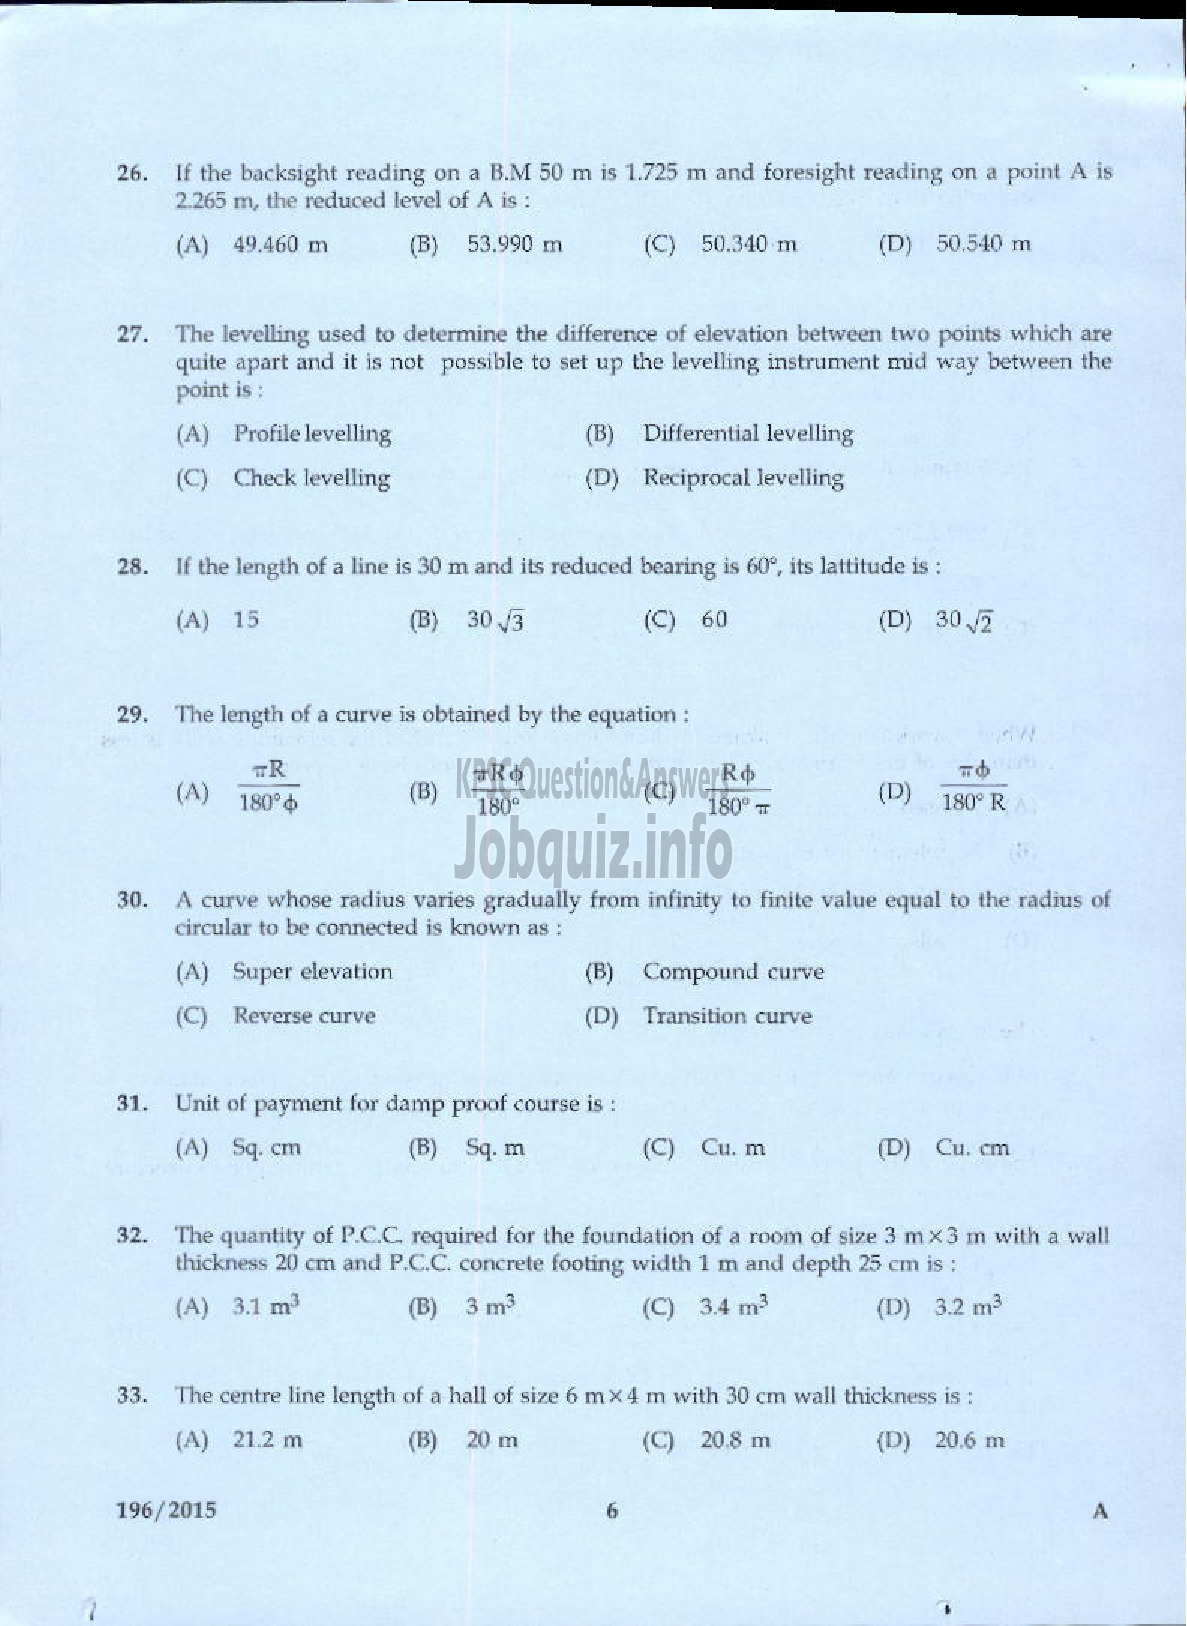 Kerala PSC Question Paper - DRAFTSMAN GR I/ TOWN PLANNING SURVEYOR GR I TOWN AND COUNTRY PLANNING-4